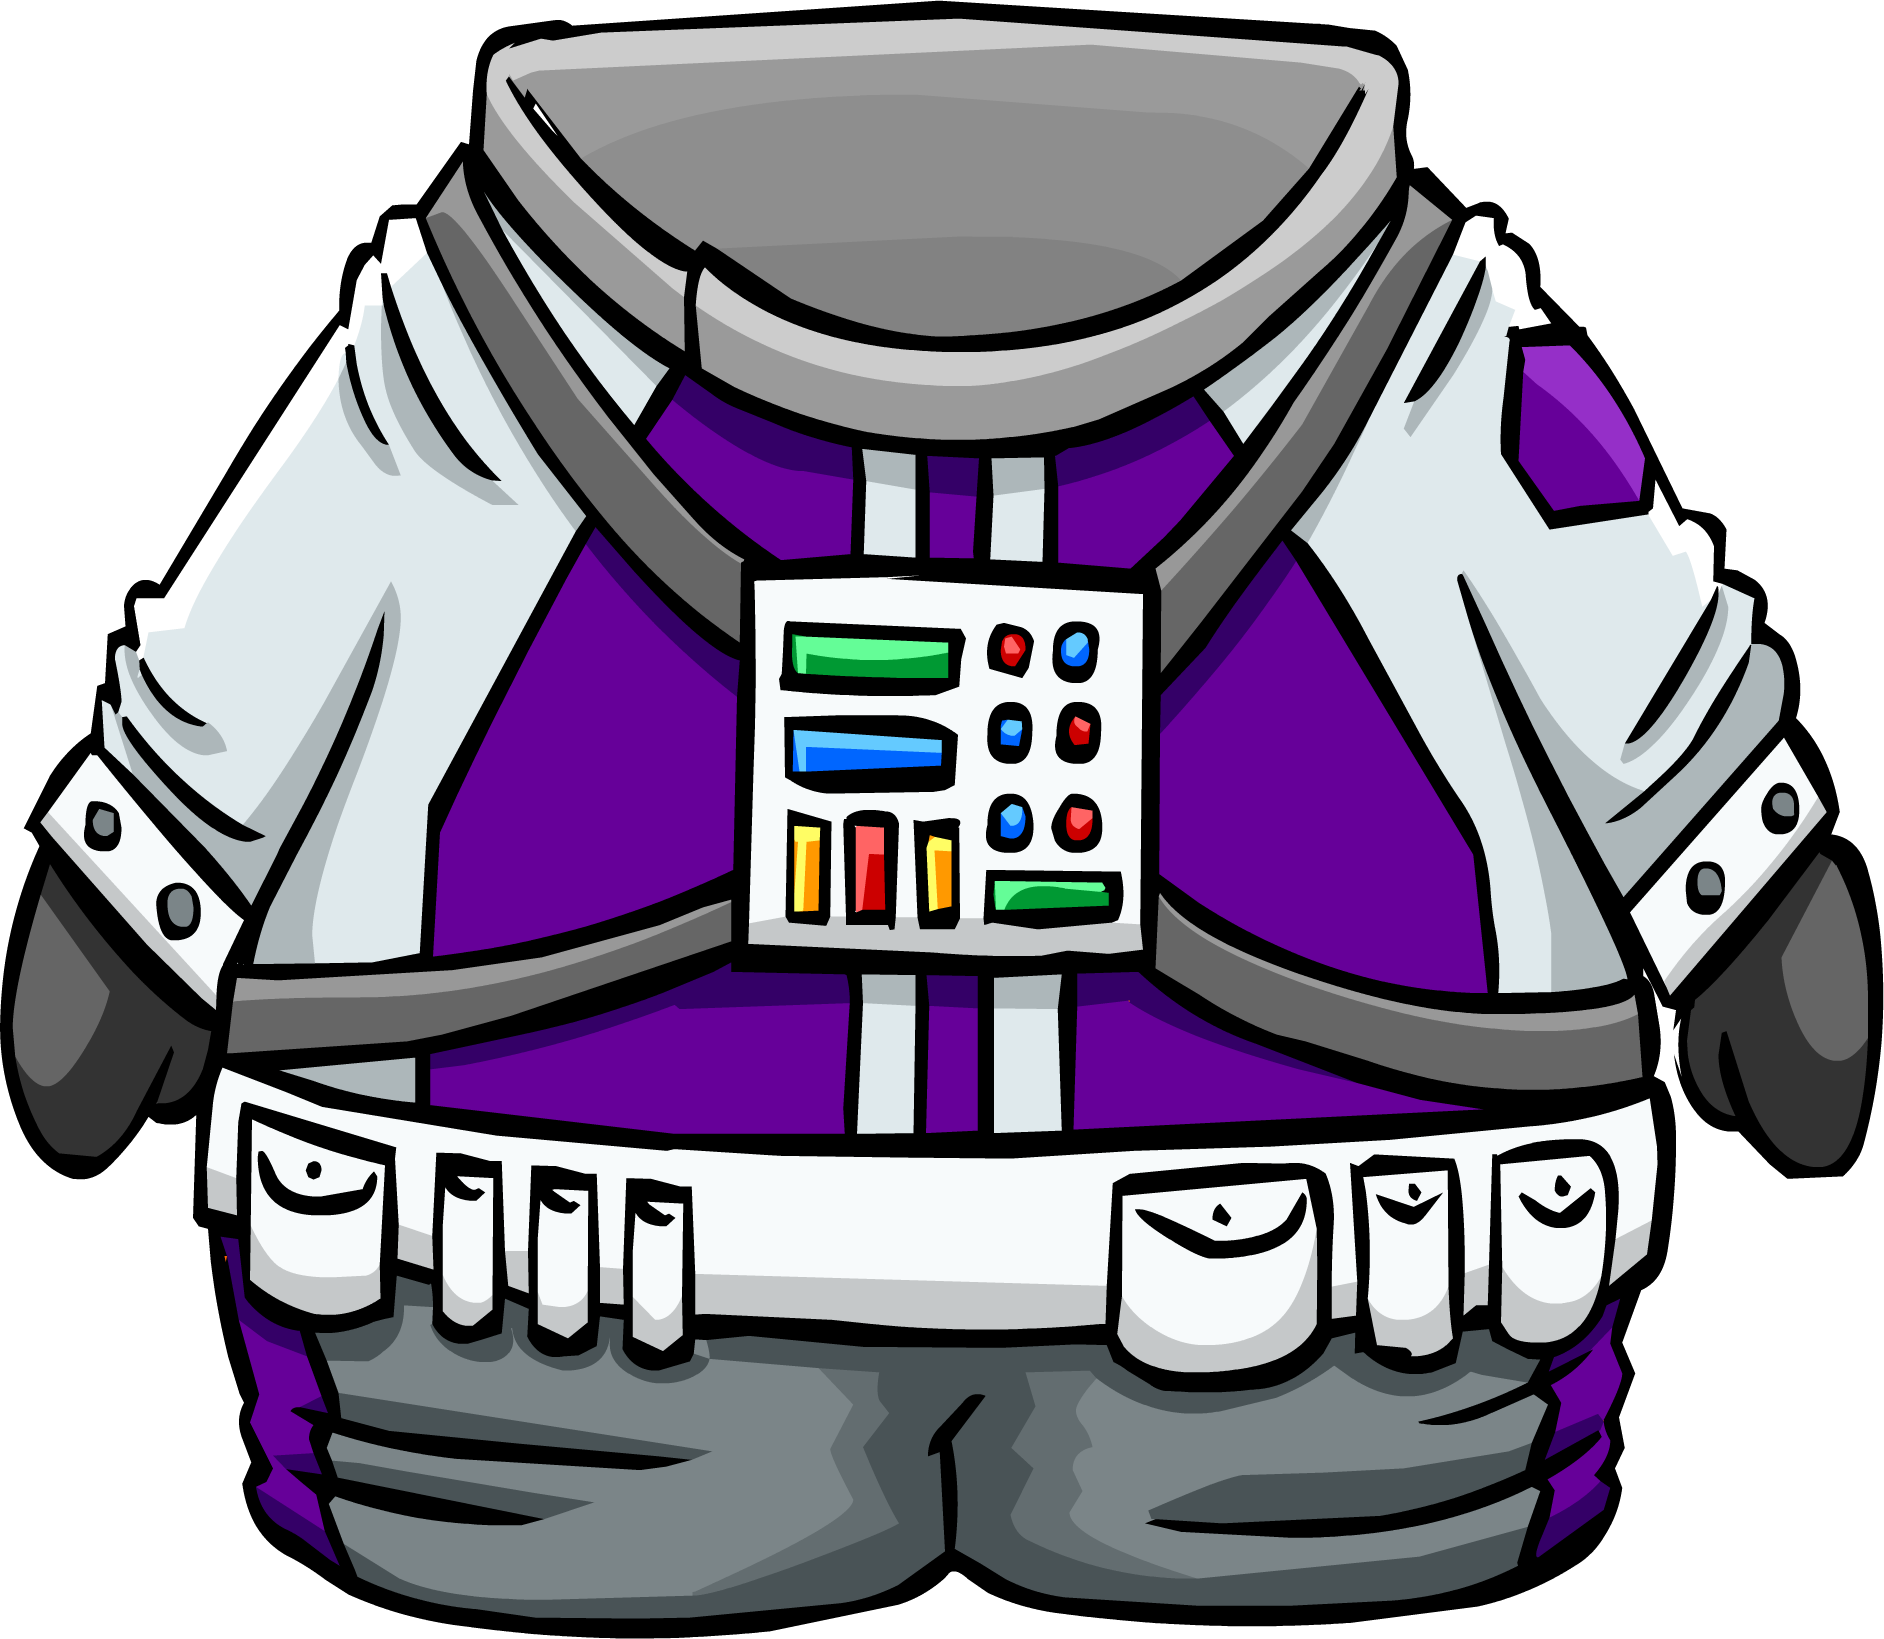 Image - Purple Space Suit.png | Club Penguin Wiki | FANDOM powered by Wikia